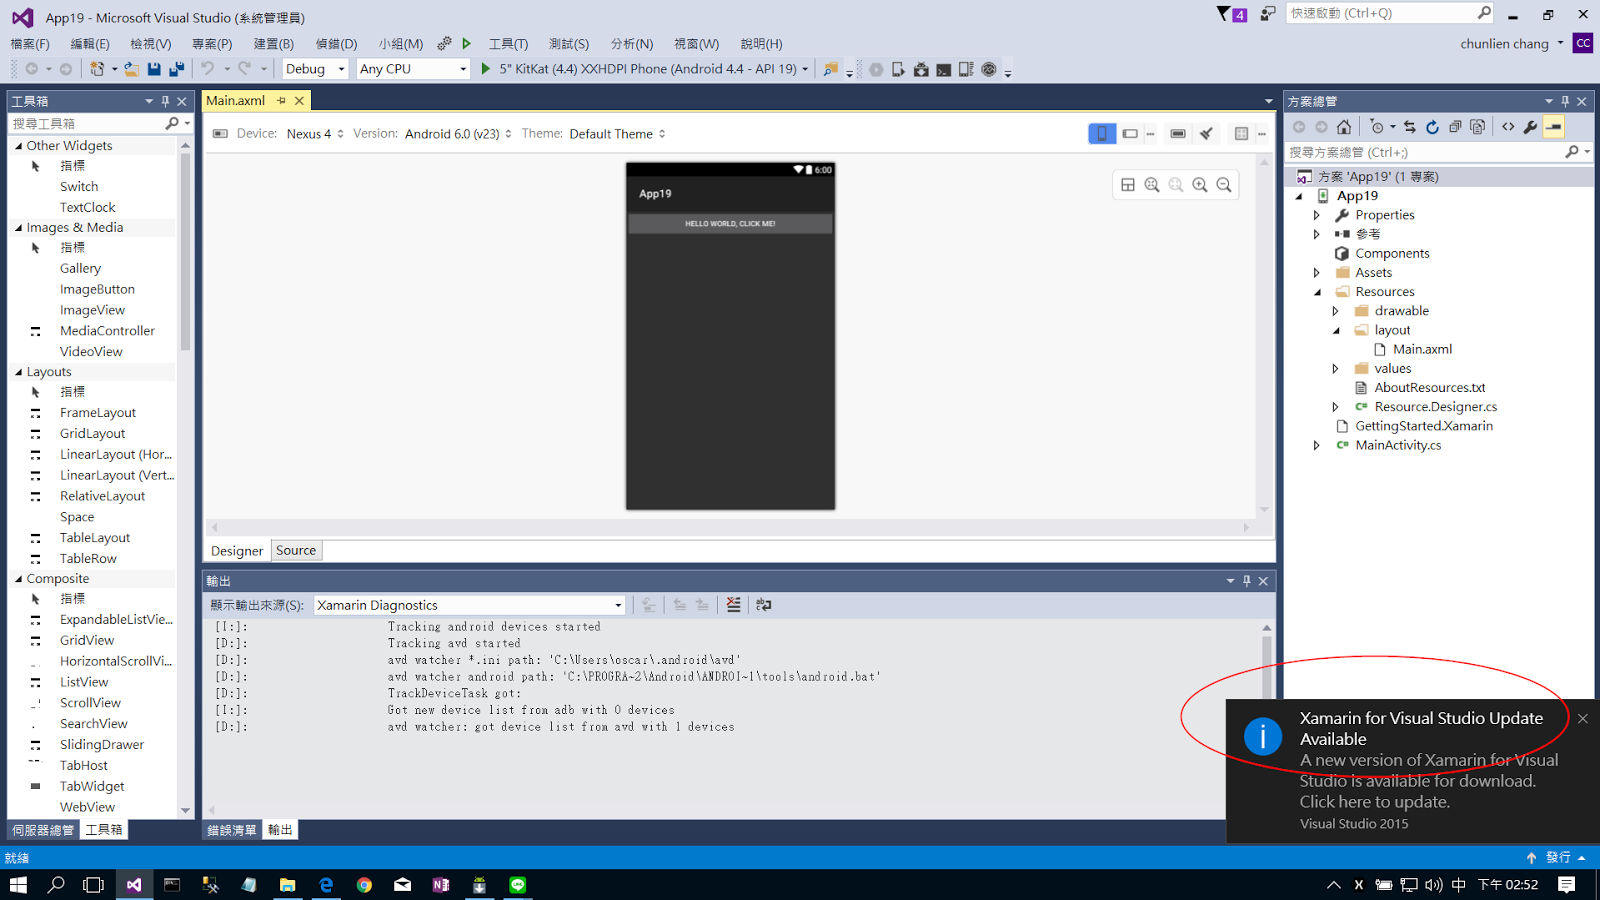 how to download xamarin for visual studio 2015